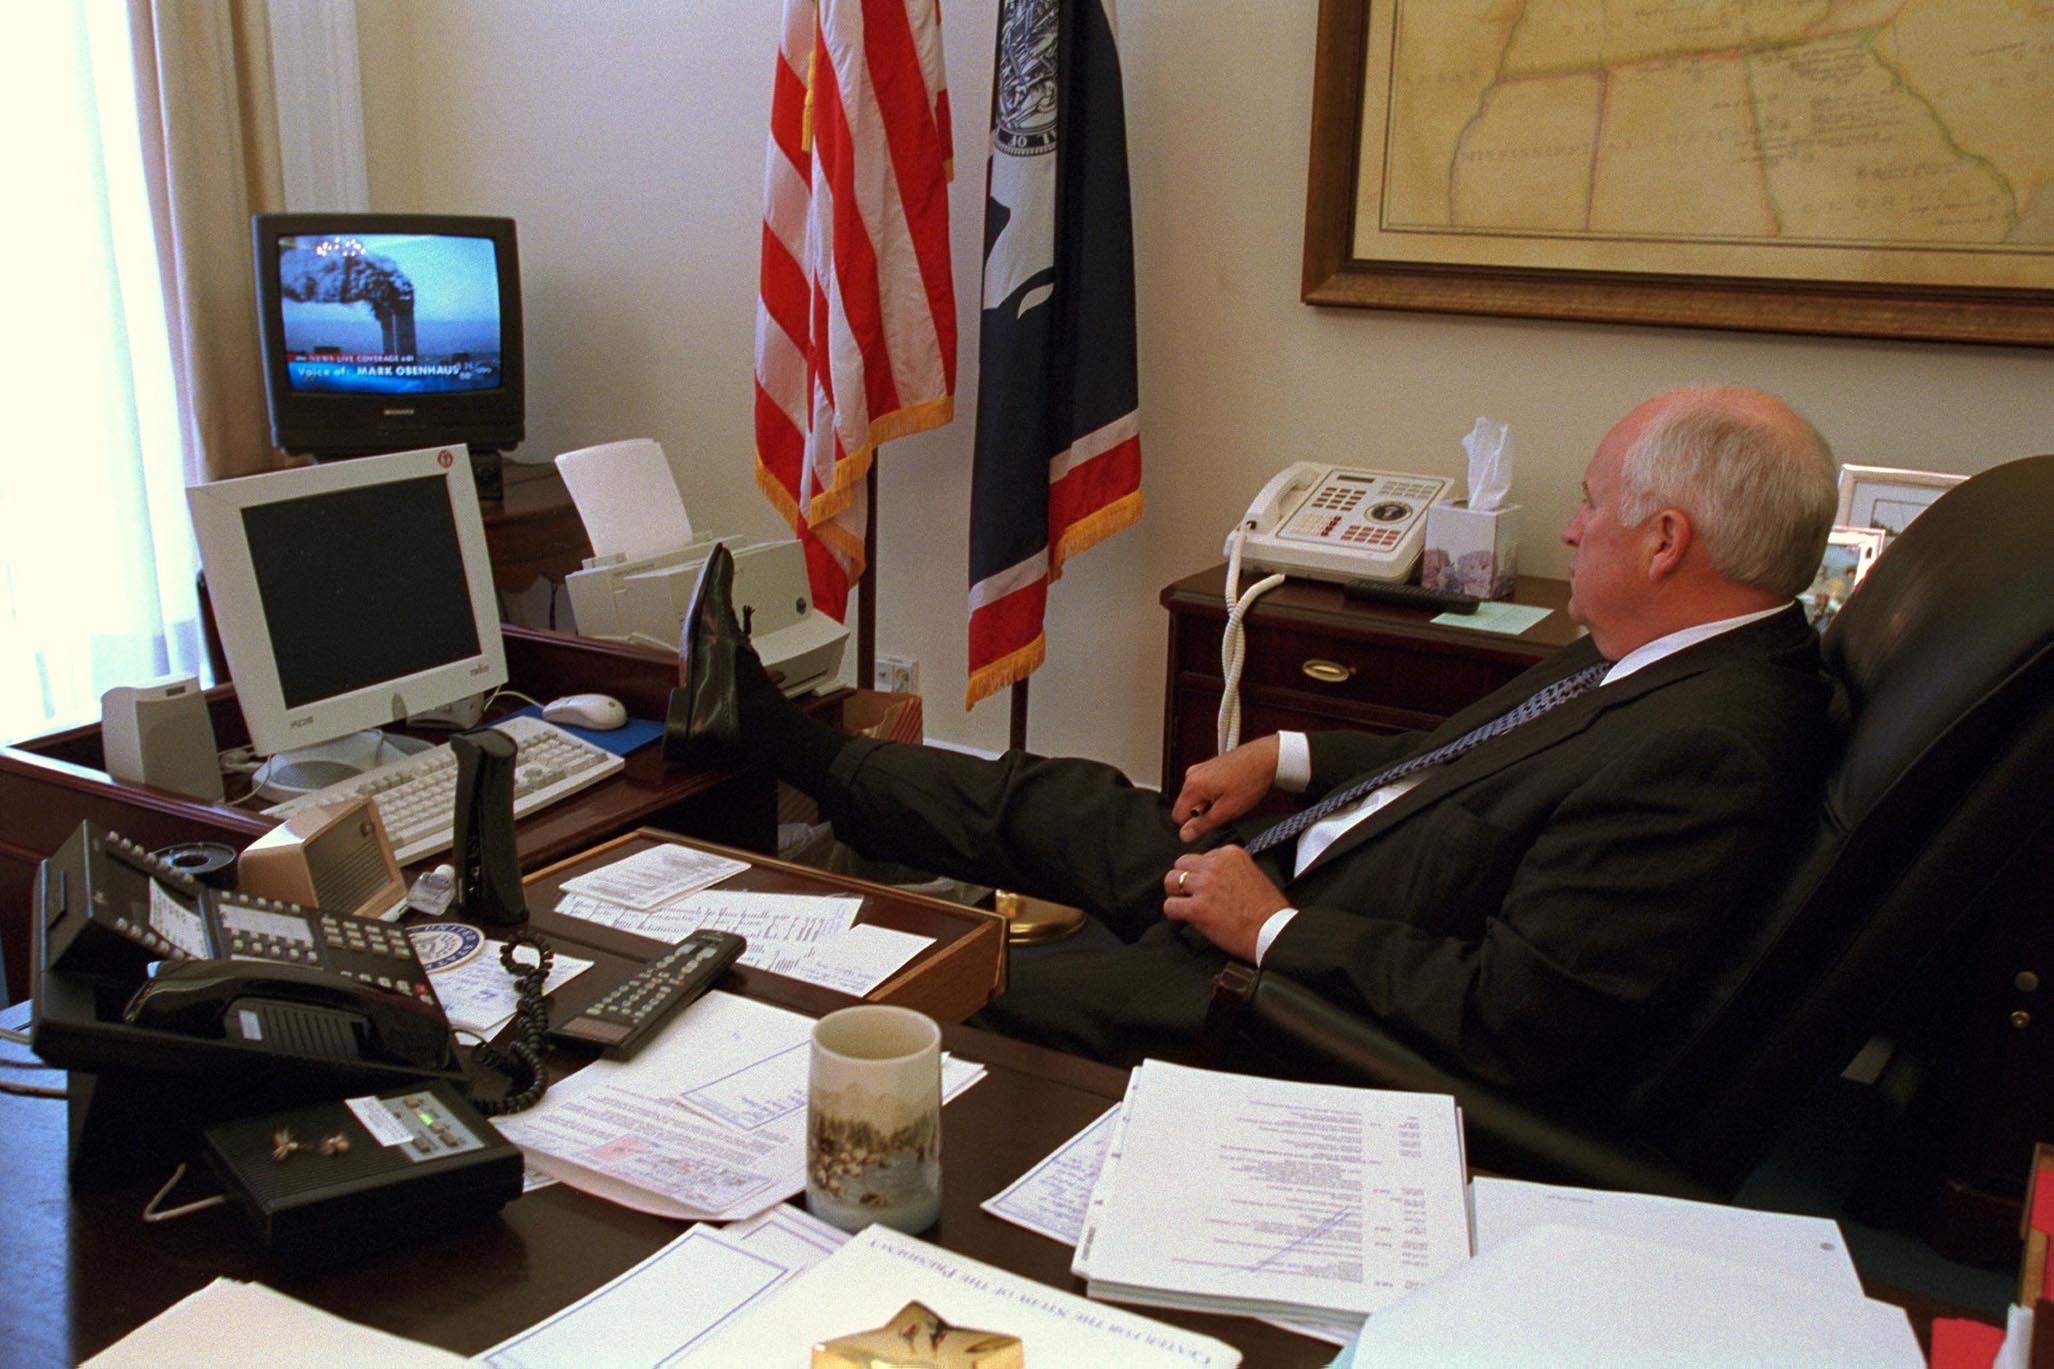 Reports of the attack on the World Trade Center's twin towers played on television in Vice President Cheney's office on Sept. 11, 2001.